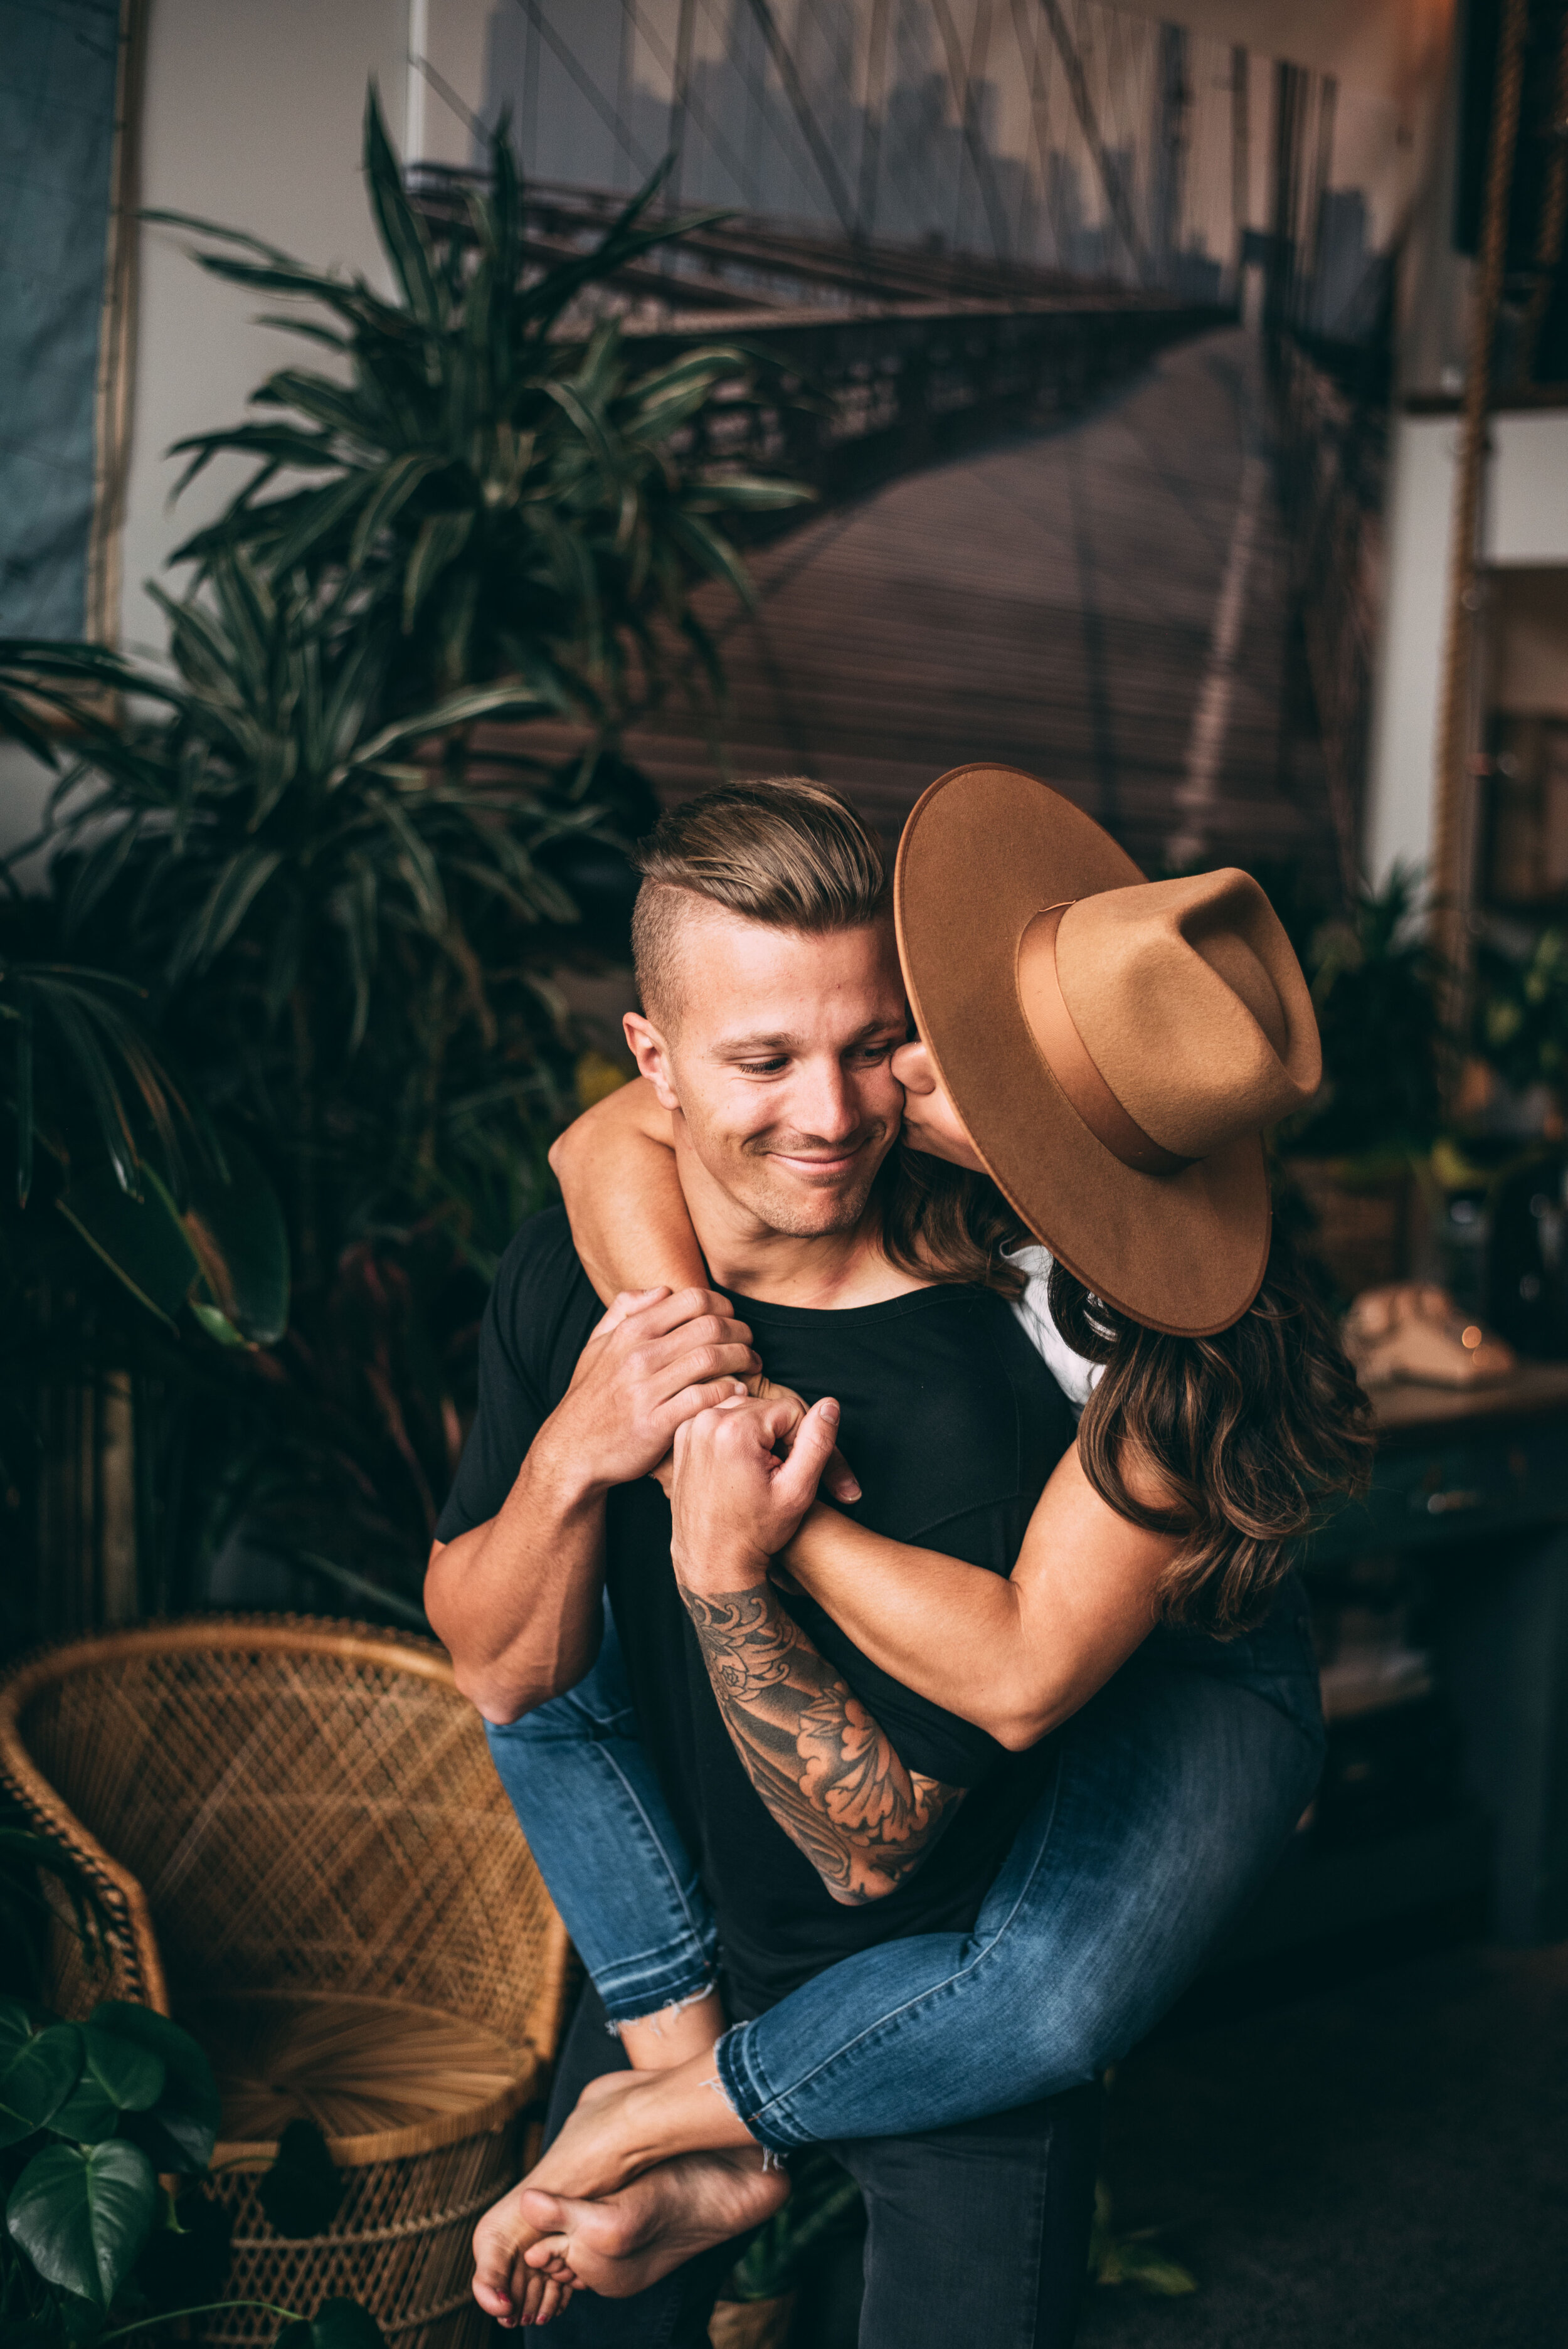 Vancouver Engagement Session - In Home Couples Session - Loft Garden Oasis - Laura Olson Photography - Sunshine Coast BC & Vancouver Wedding & Elopement Photographer3781.jpg